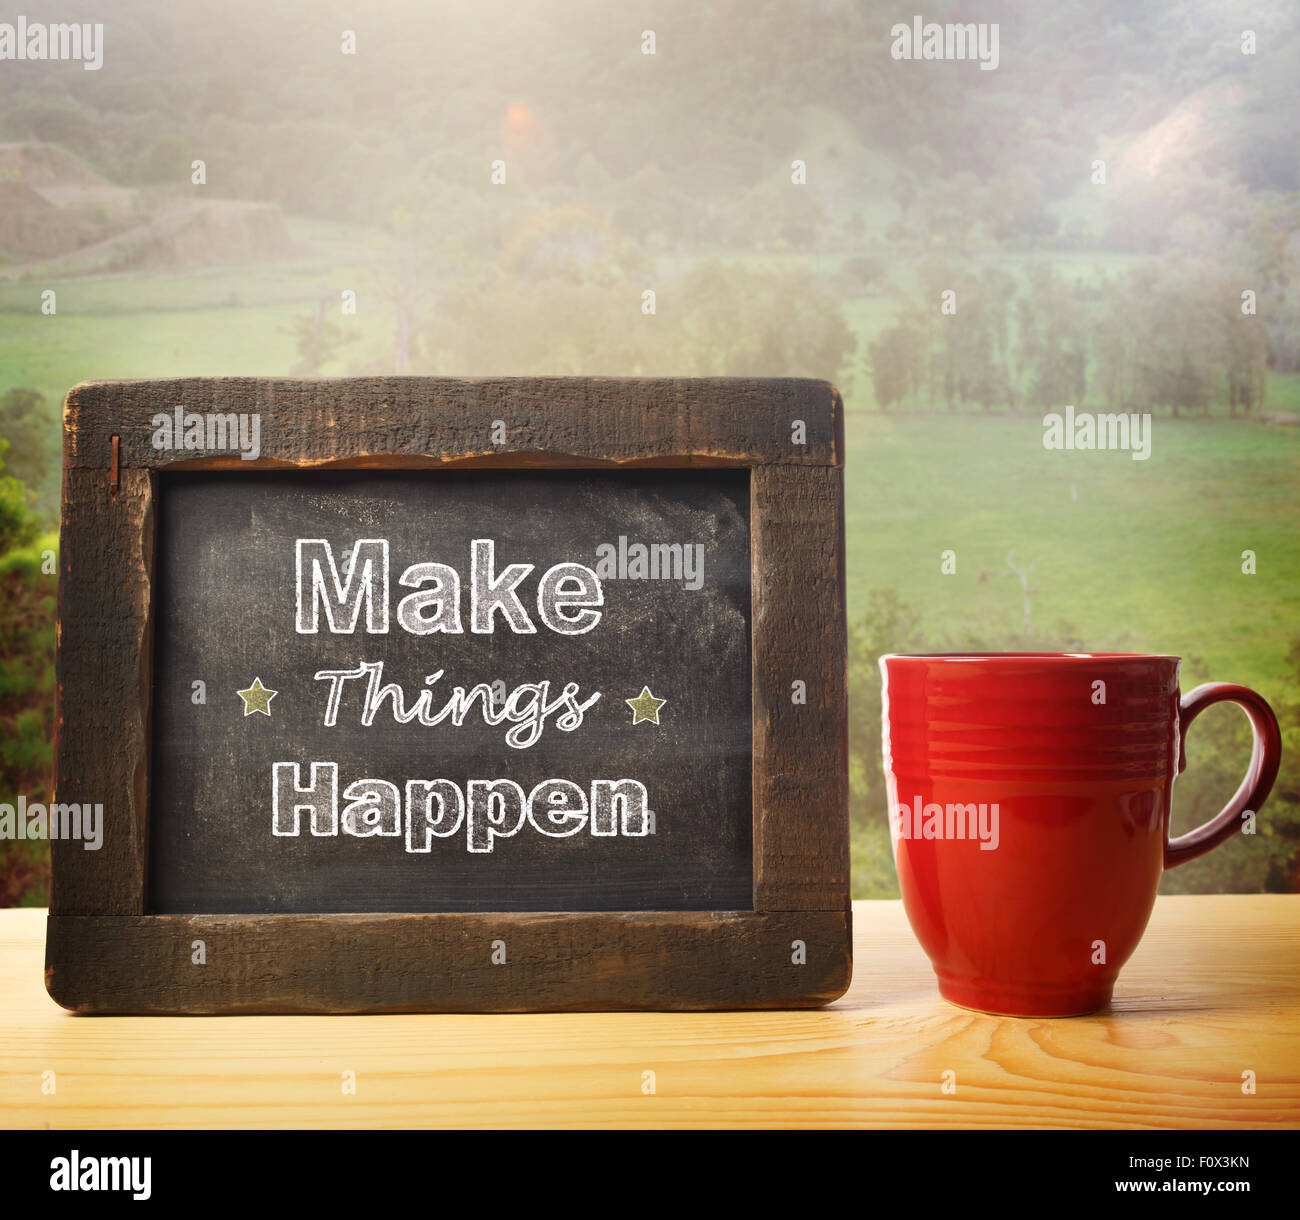 Make Things happen inscribed on blackboard rustic style Stock Photo